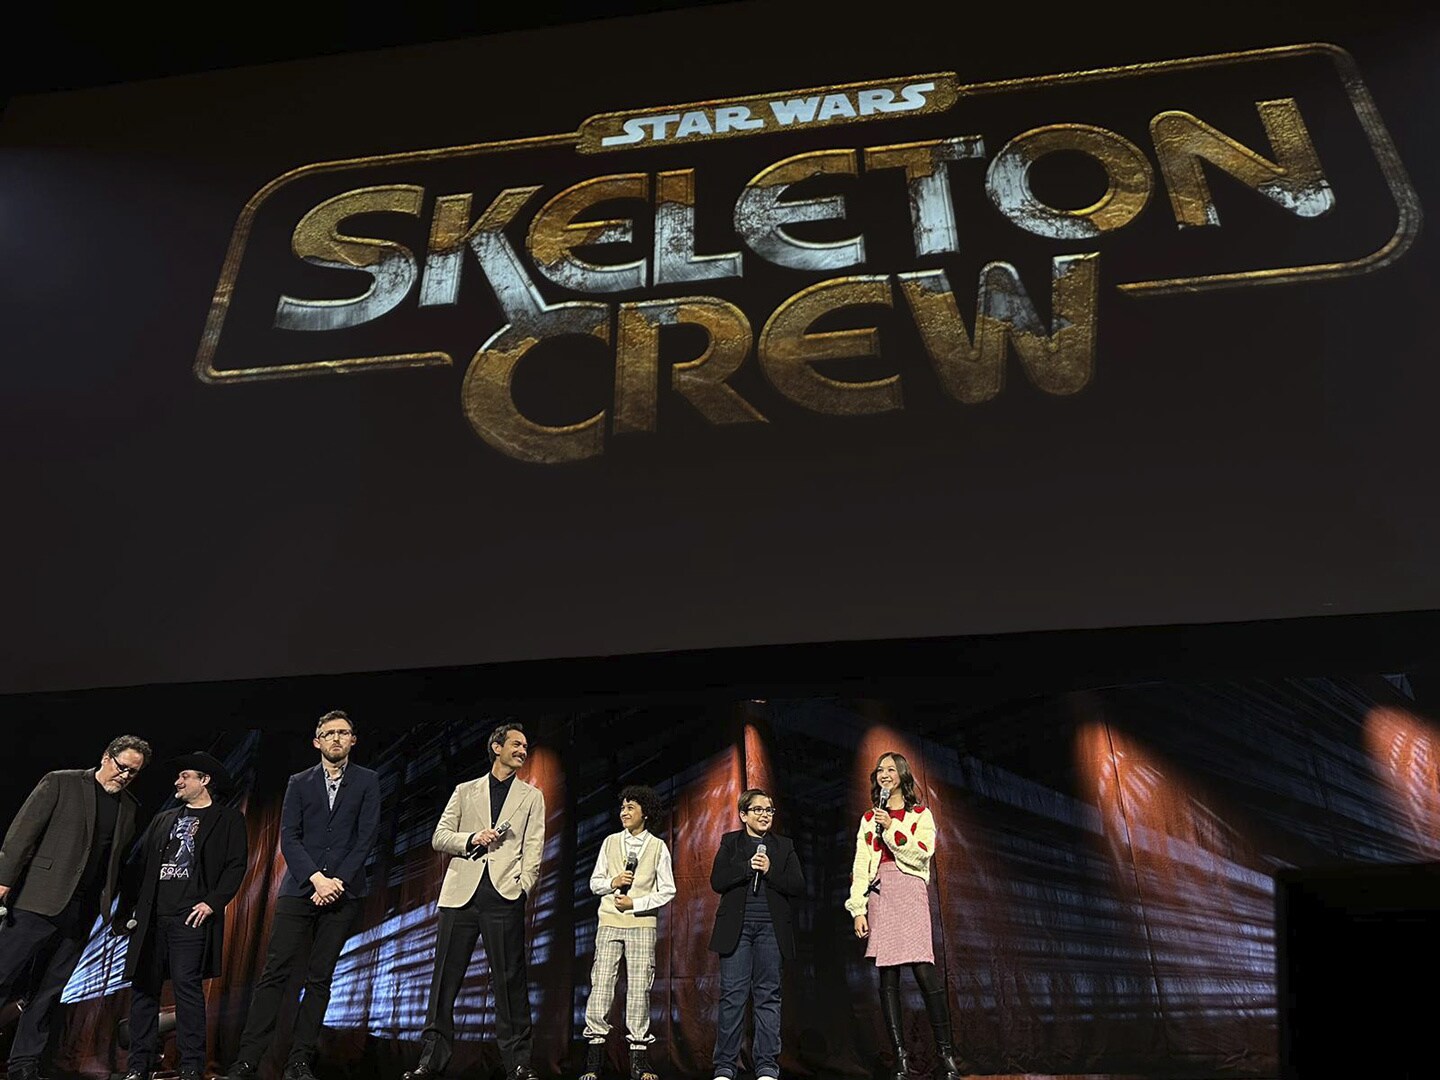 The cast of Skeleton Crew took the stage together for the first time at Star Wars Celebration!